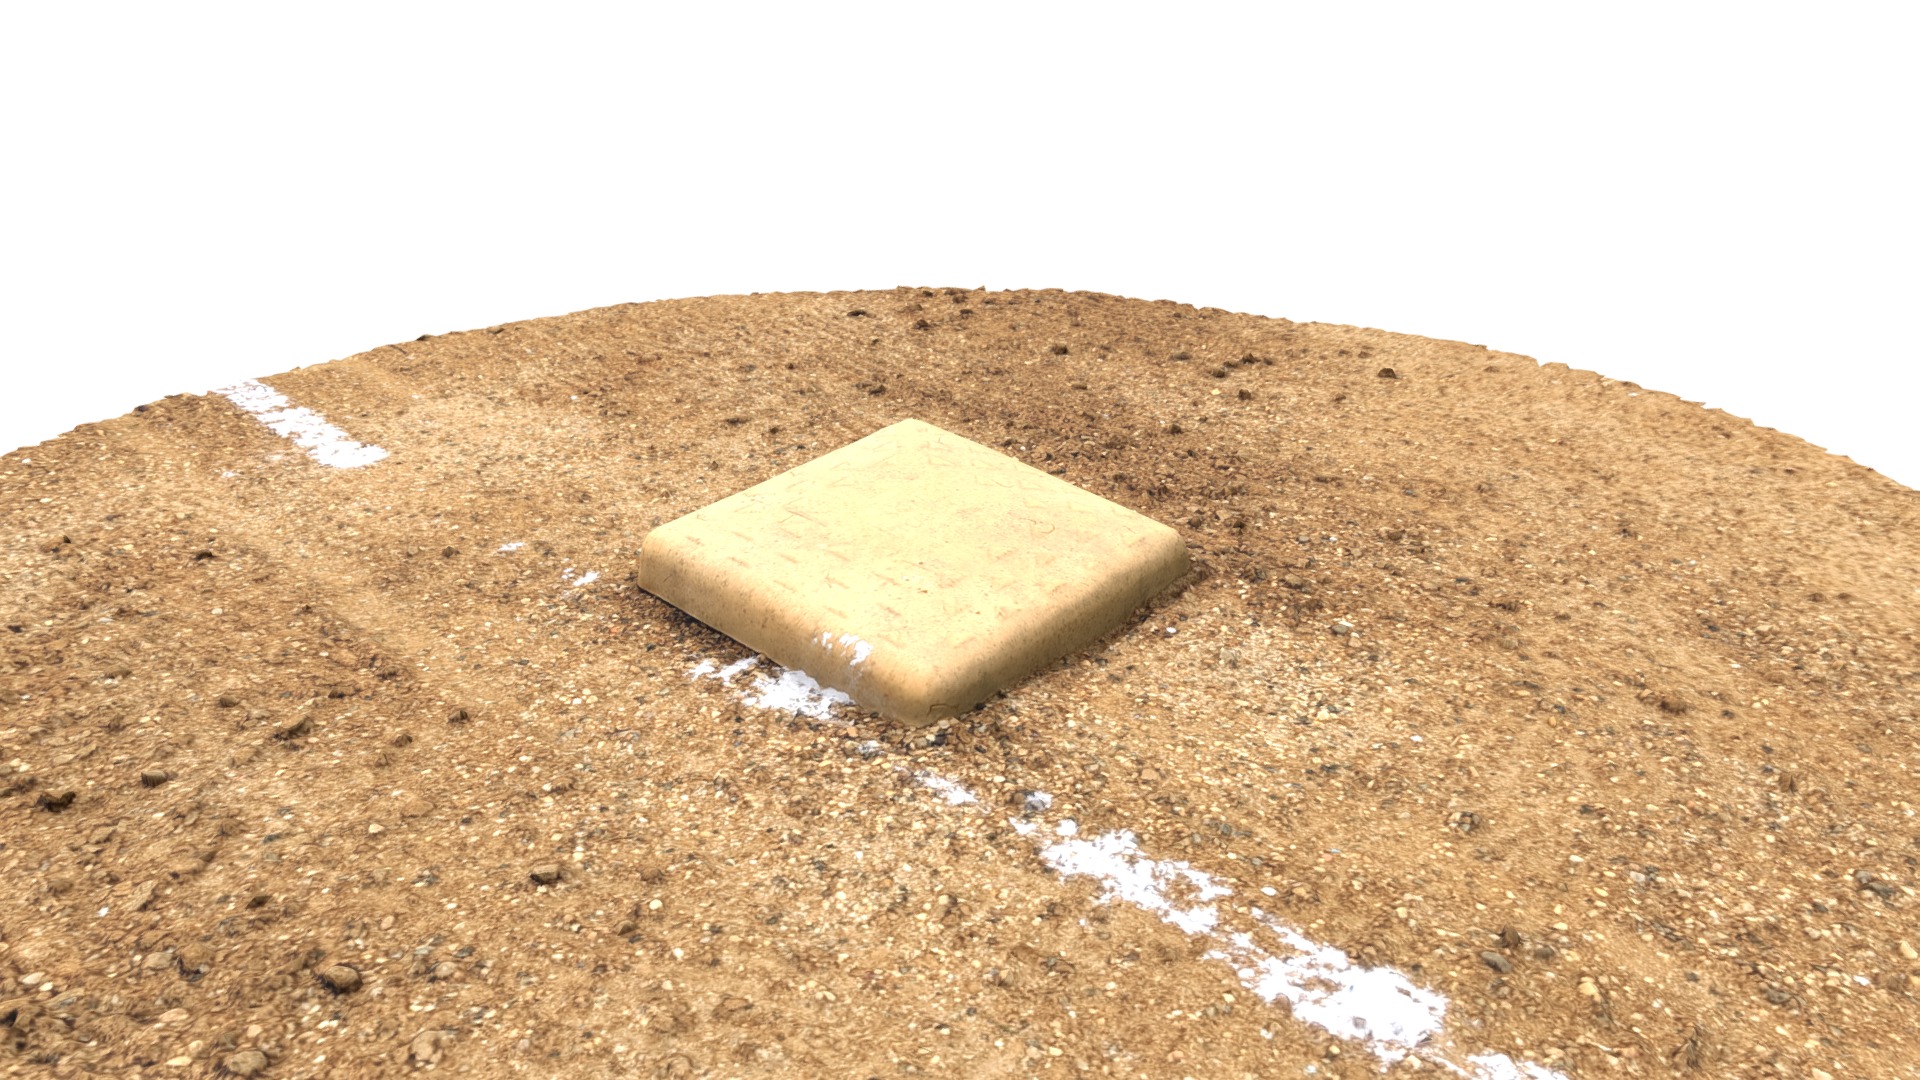 3D model Third Base - This is a 3D model of the Third Base. The 3D model is about a square object on a dirt surface.